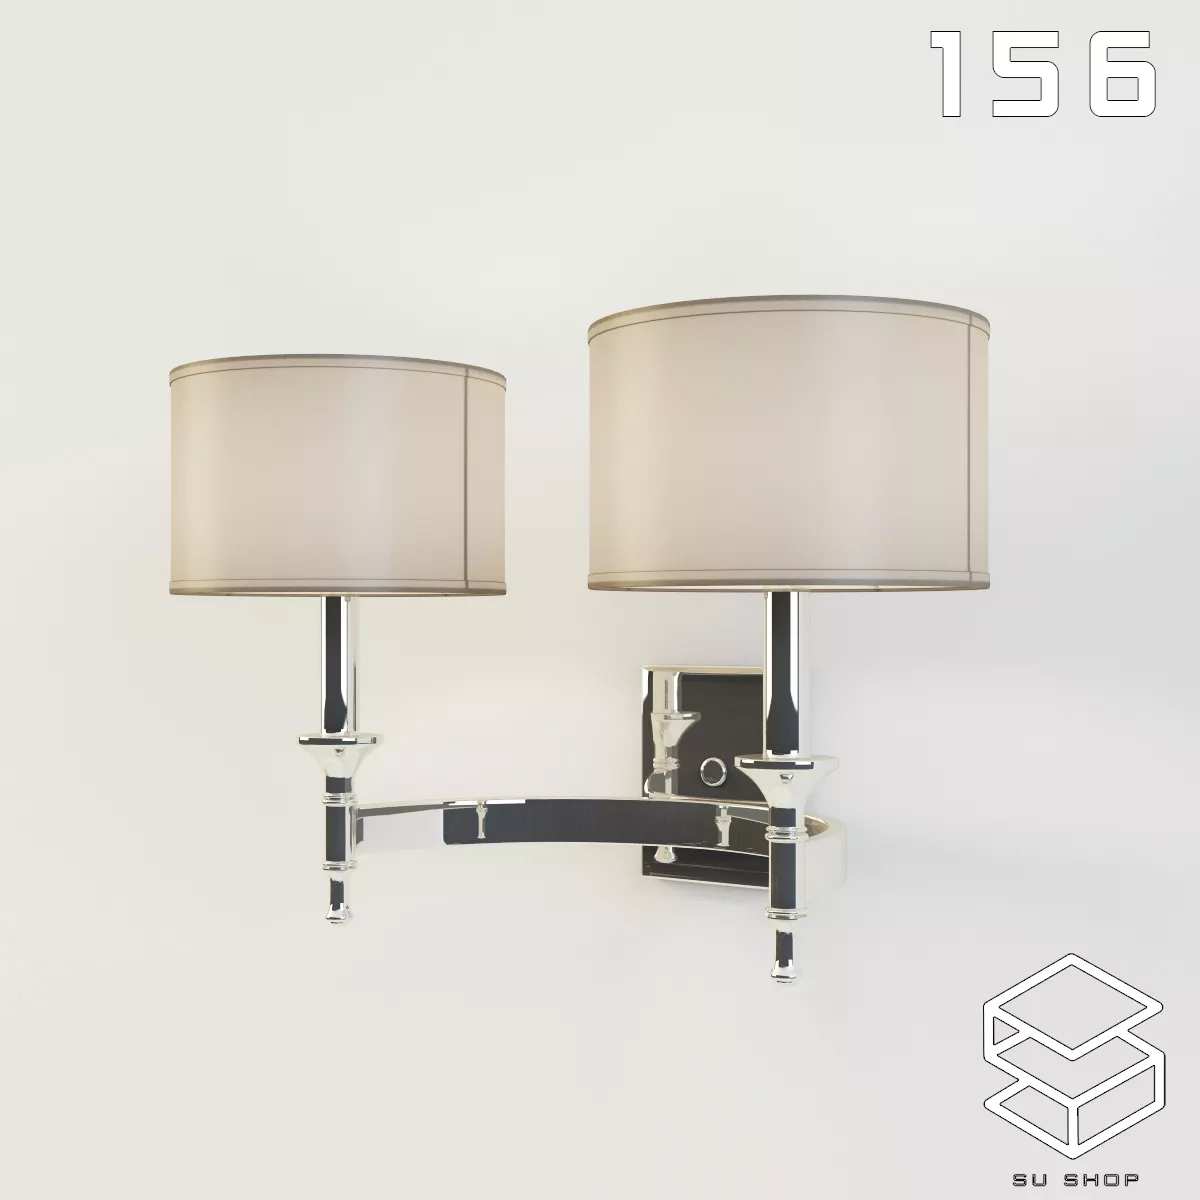 MODERN WALL LAMP - SKETCHUP 3D MODEL - VRAY OR ENSCAPE - ID16171